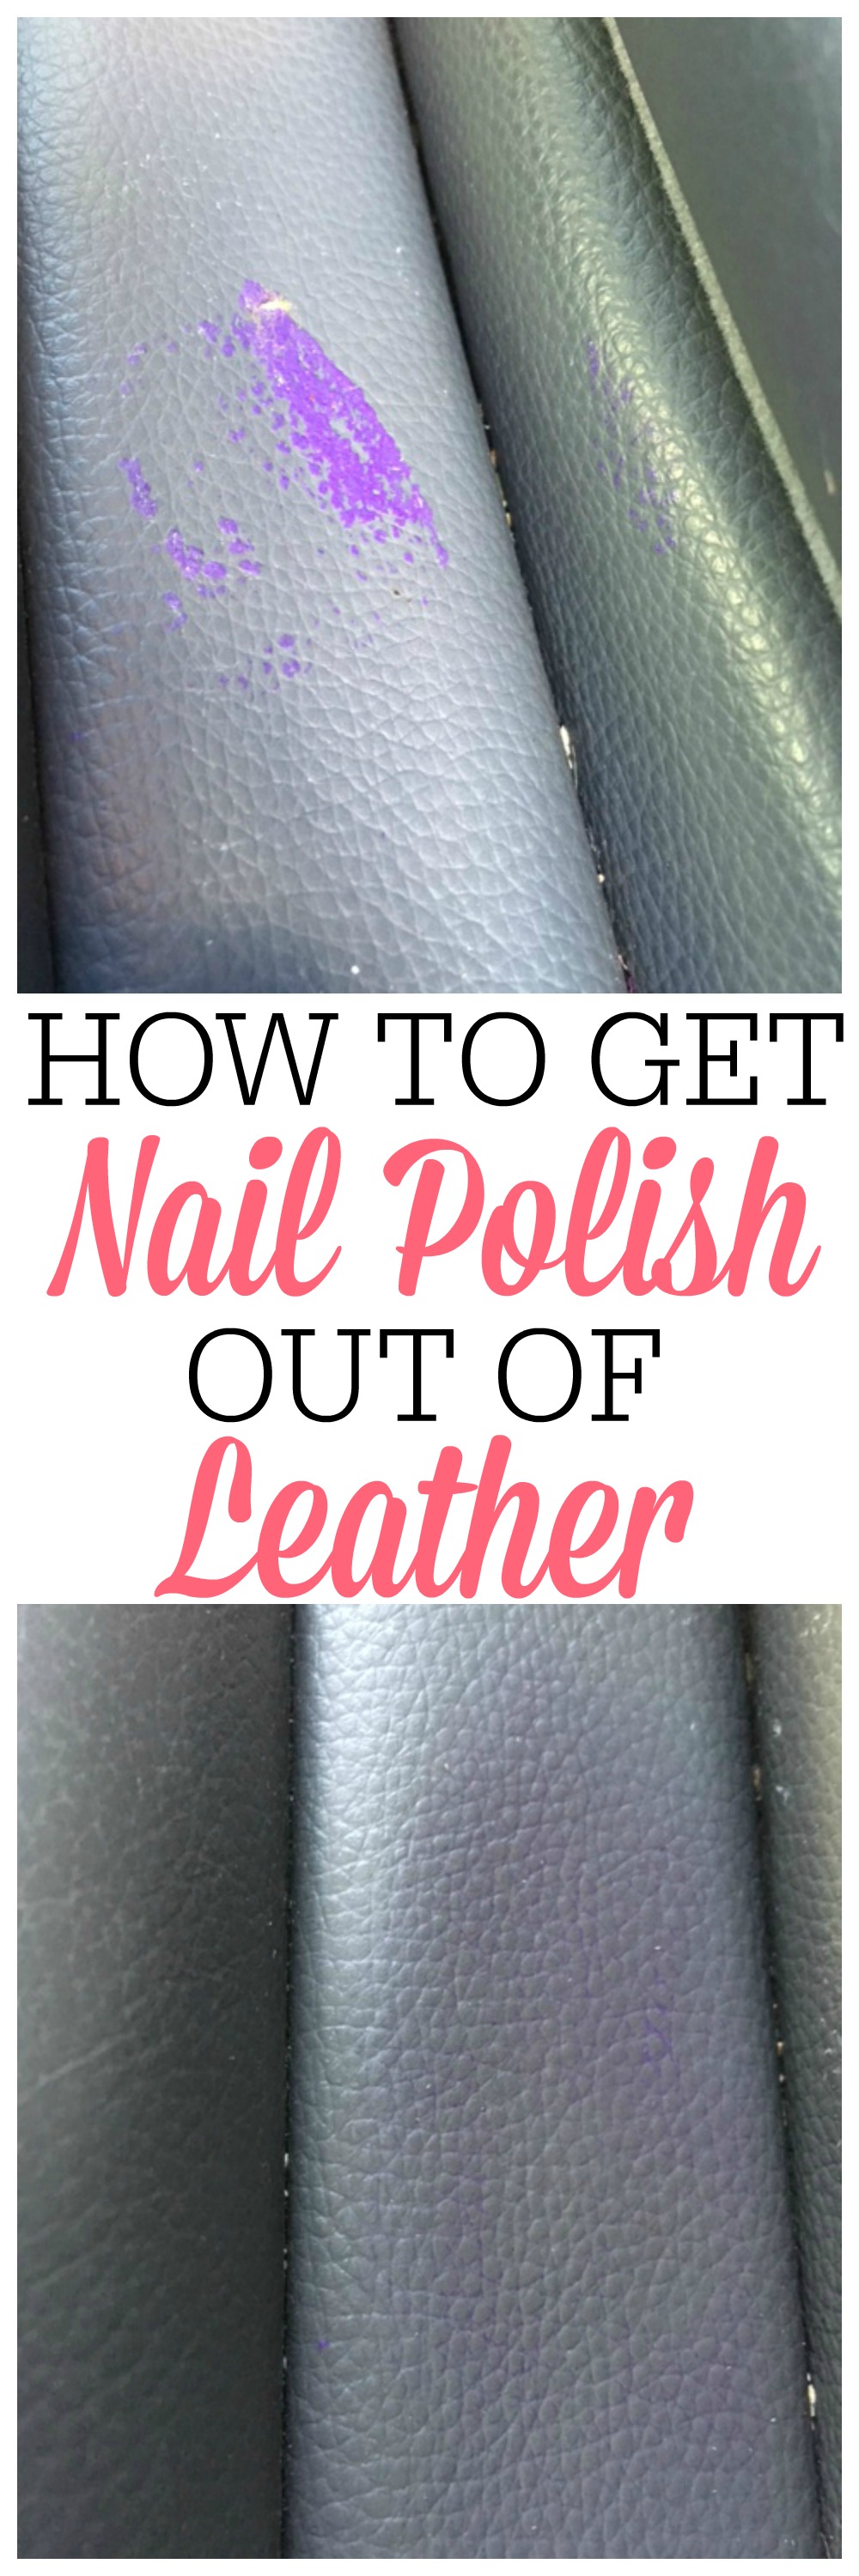 How To Get Nail Polish Out Of Leather - Frugally Blonde